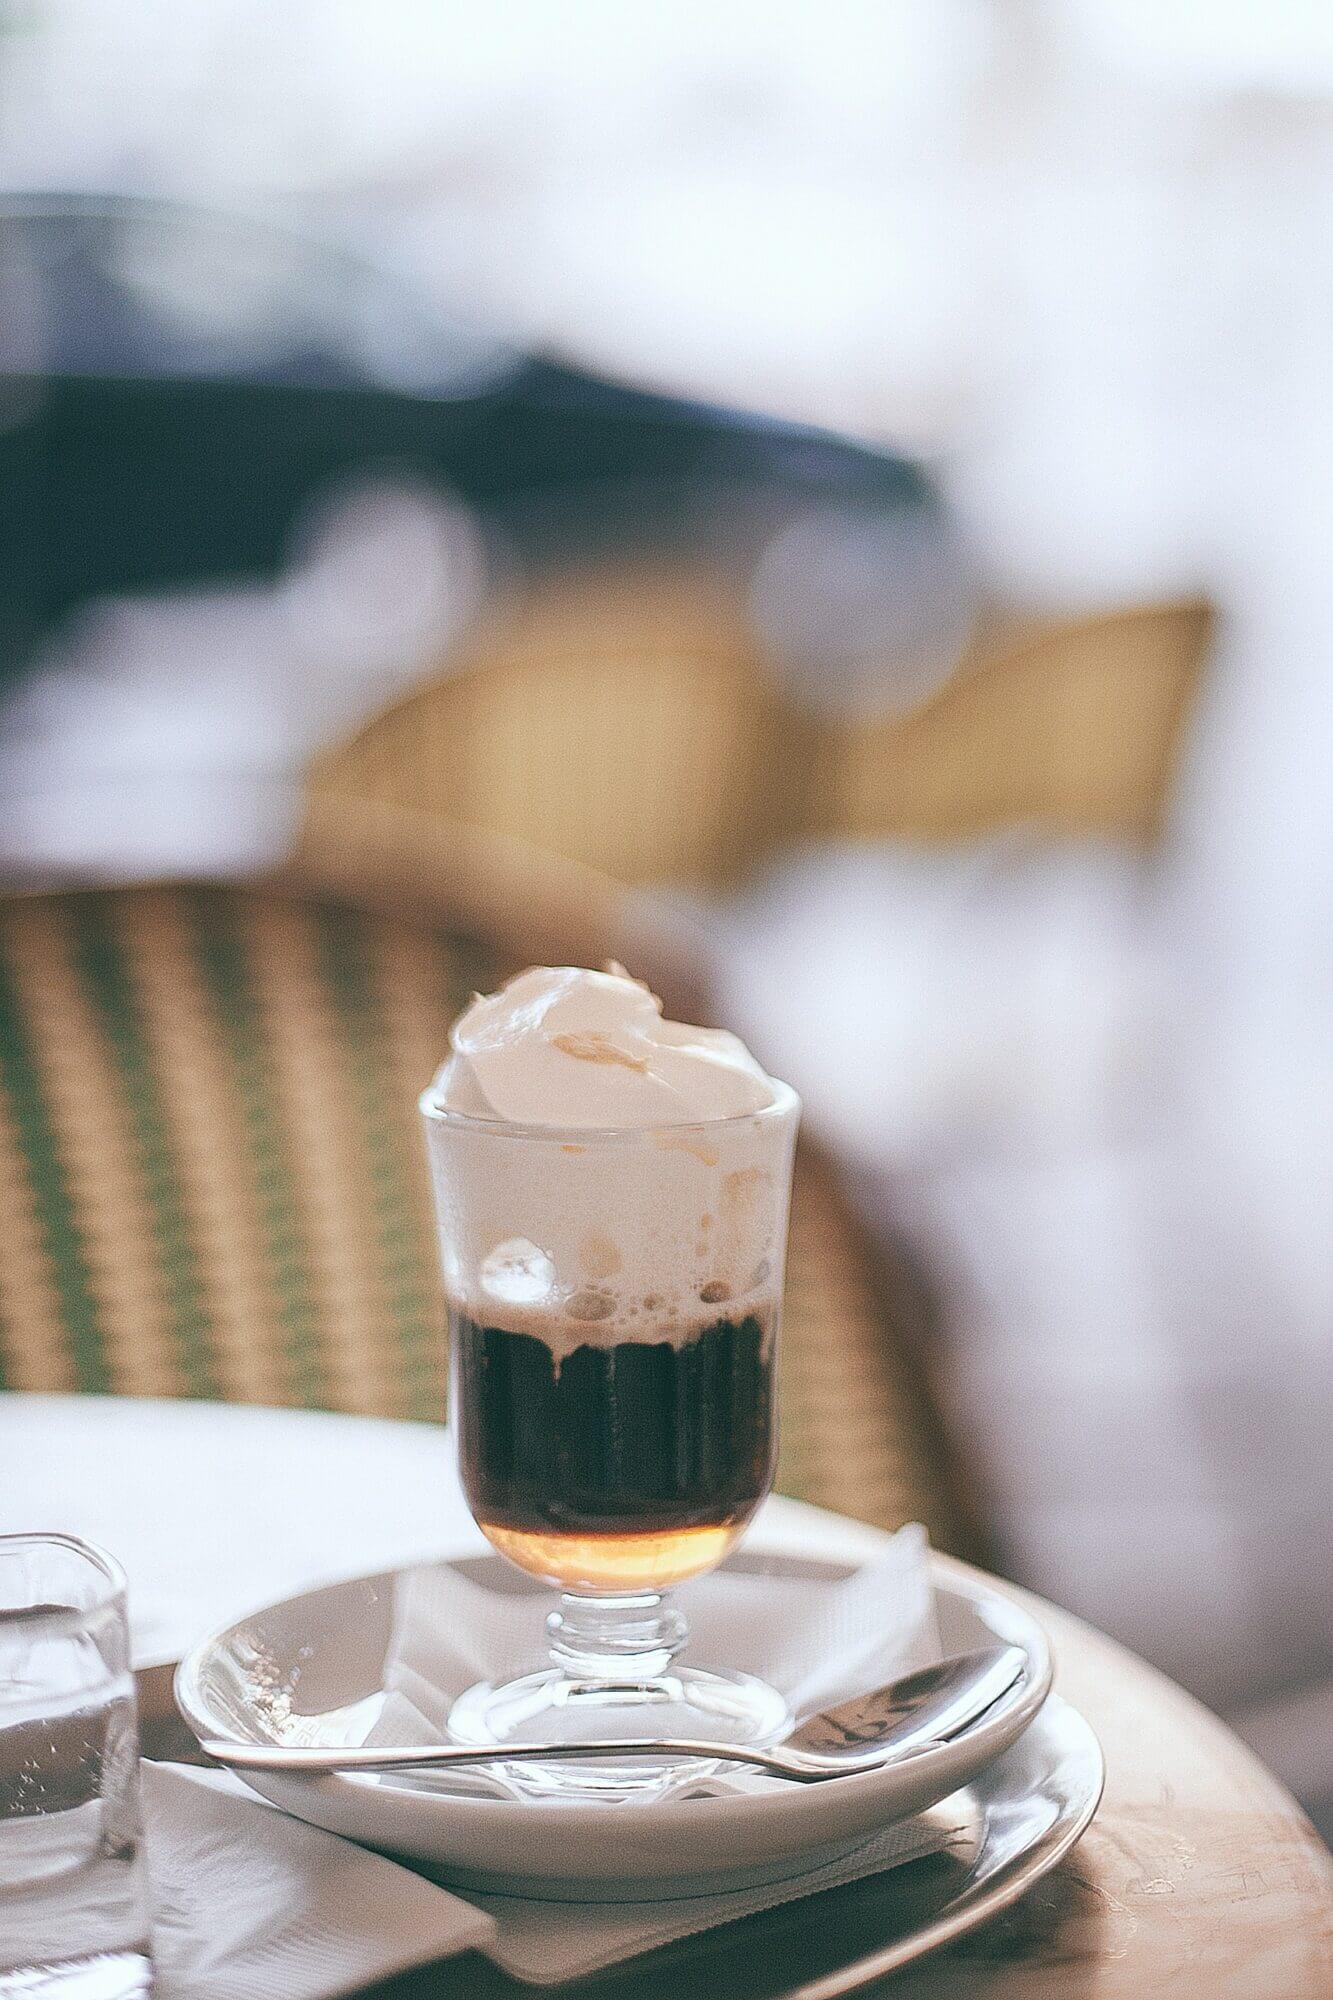 A cup of coffee with whipped cream sitting on a table.